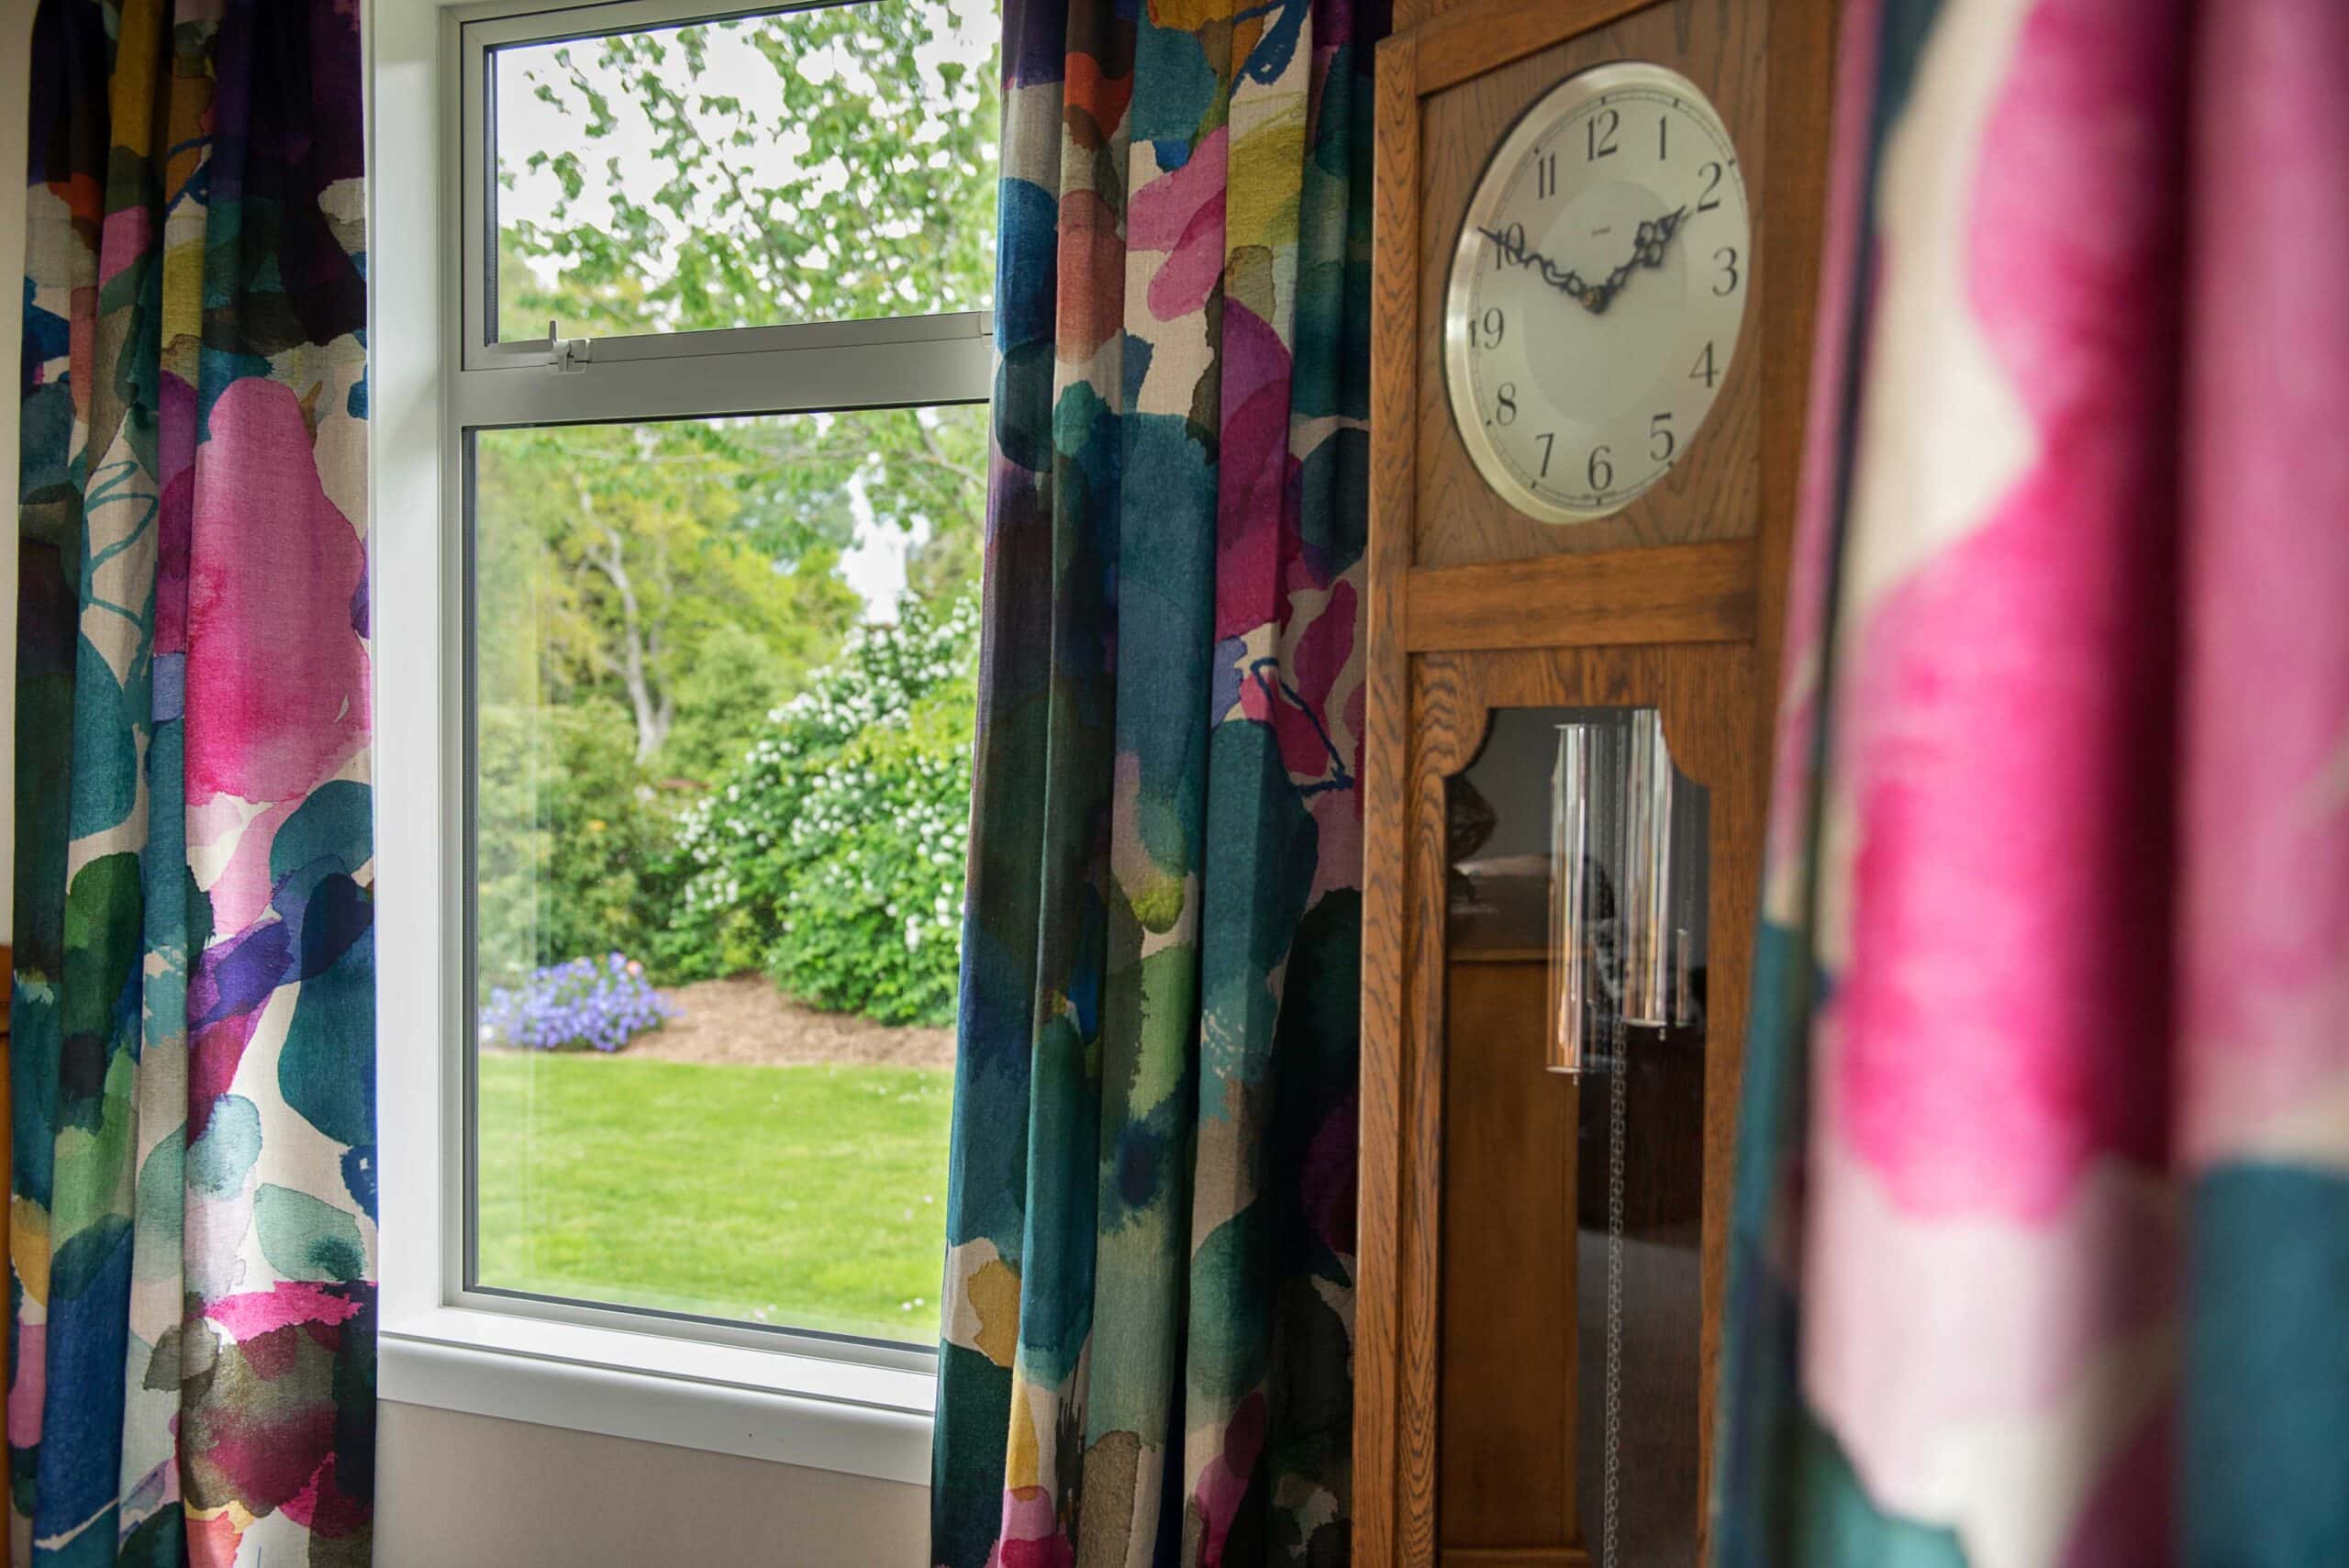 Bluebellgray curtains frame the beautiful garden outside